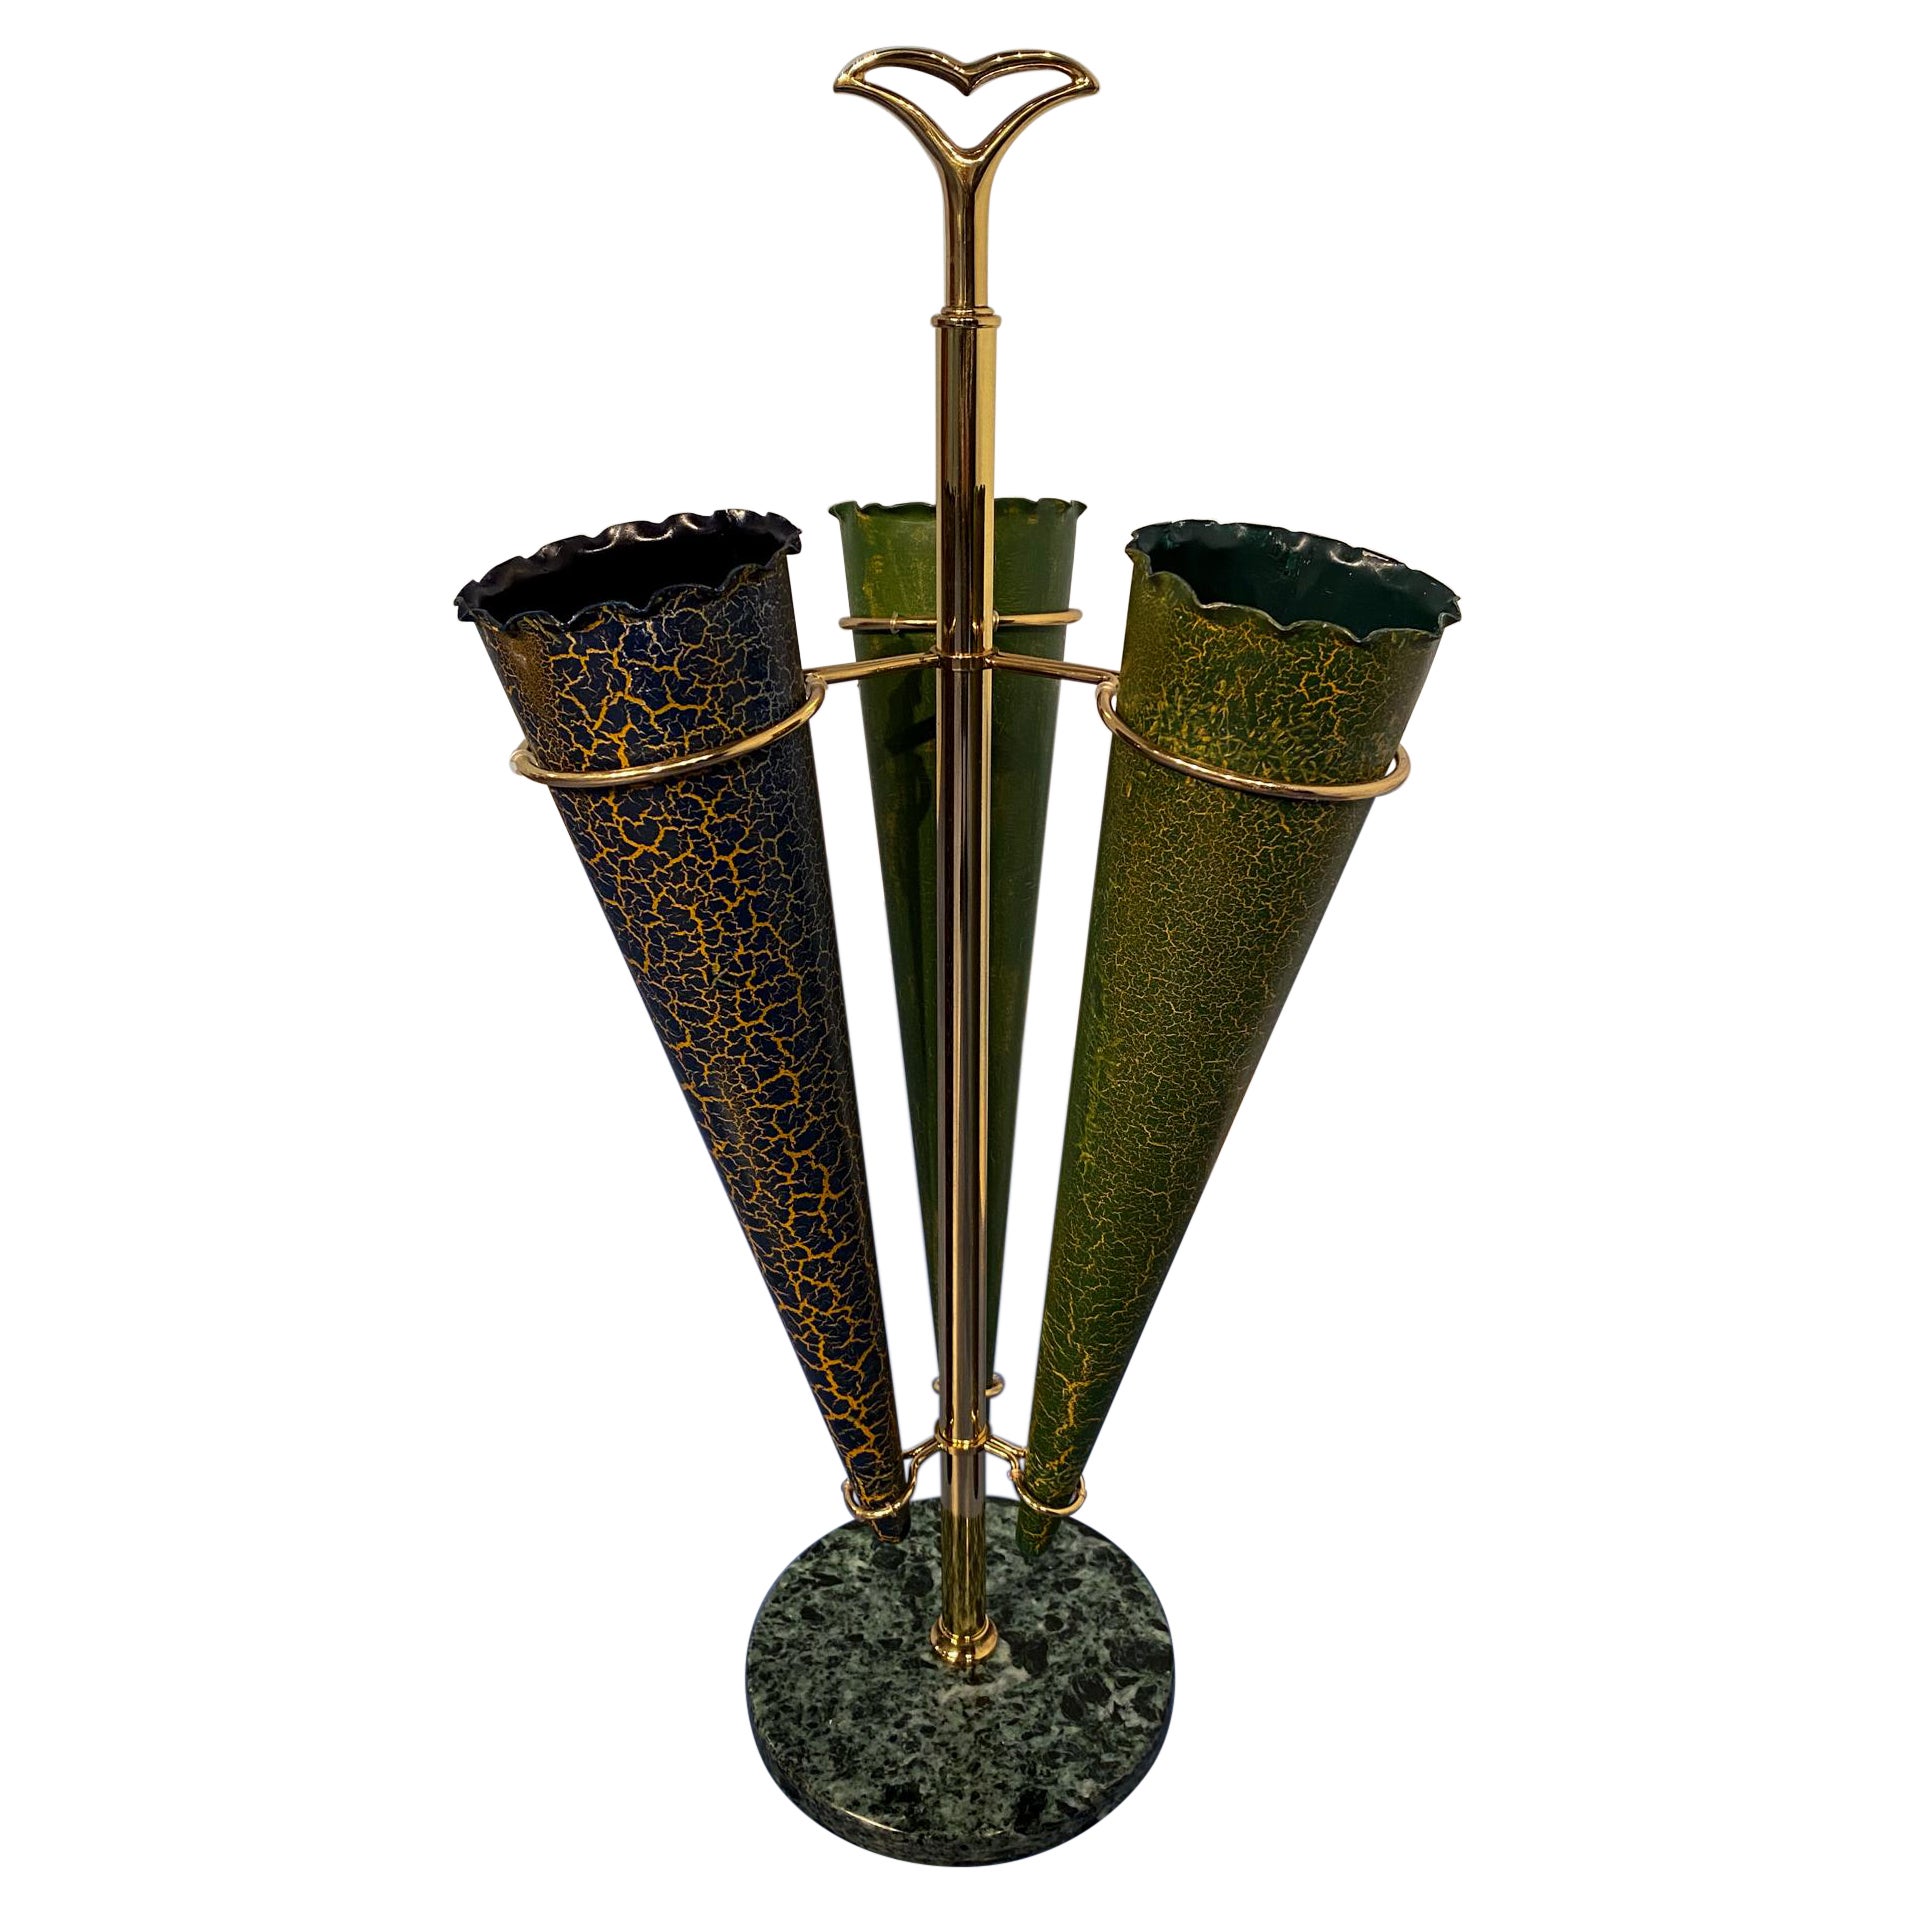 Italian Mid-Century Green Color Umbrella Stands "Cracked Effect", 1950s For Sale